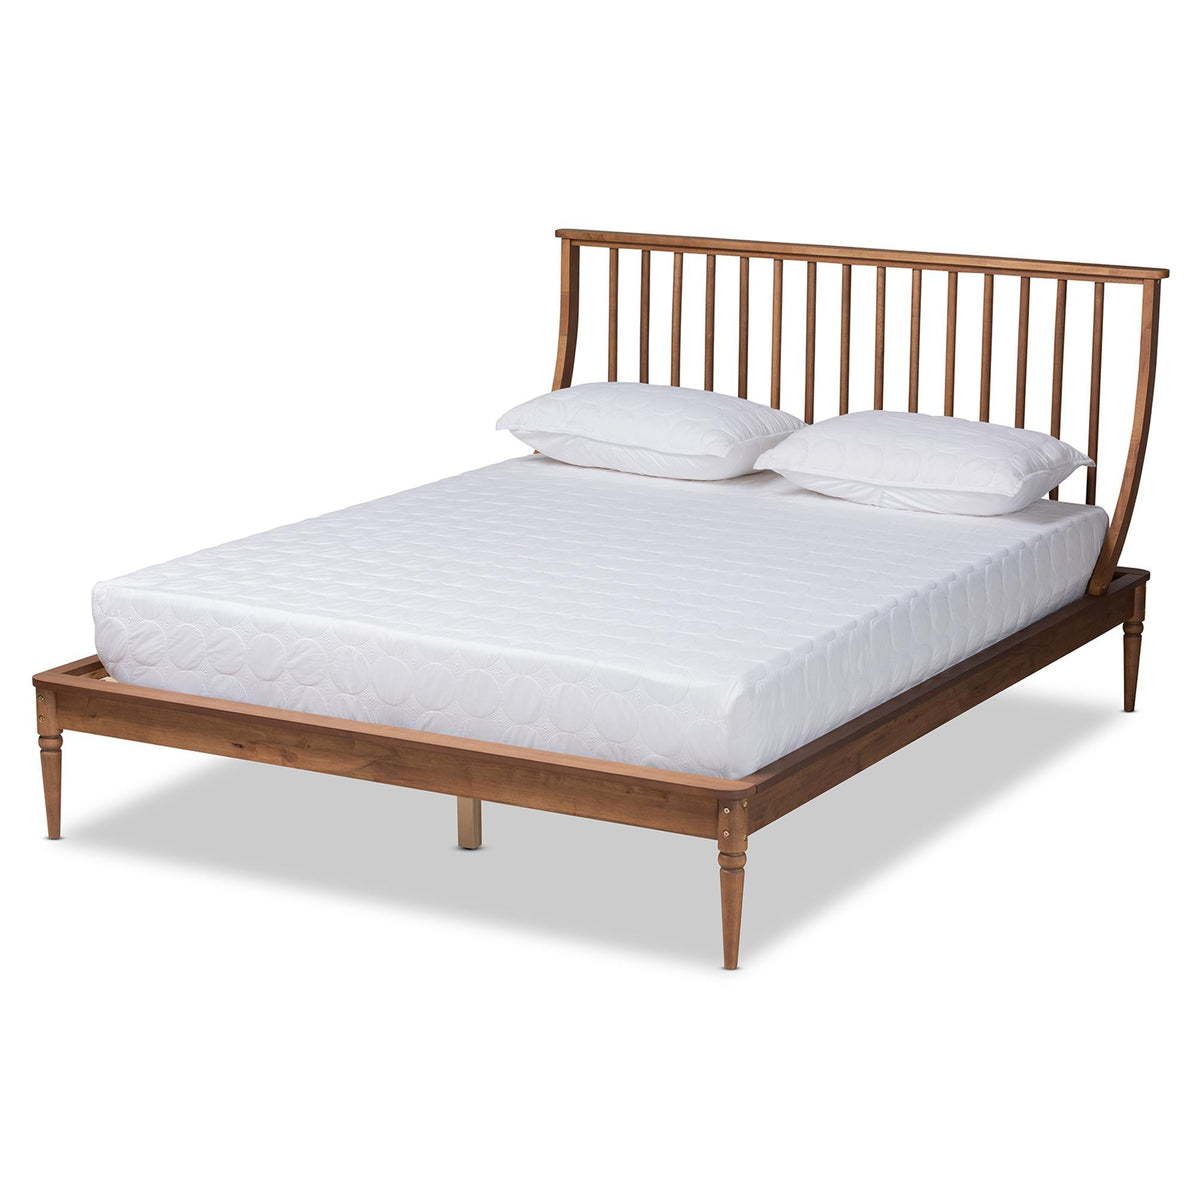 Baxton Studio Abel Classic And Traditional Transitional Walnut Brown Finished Wood Queen Size Platform Bed - MG0064-Walnut-Queen